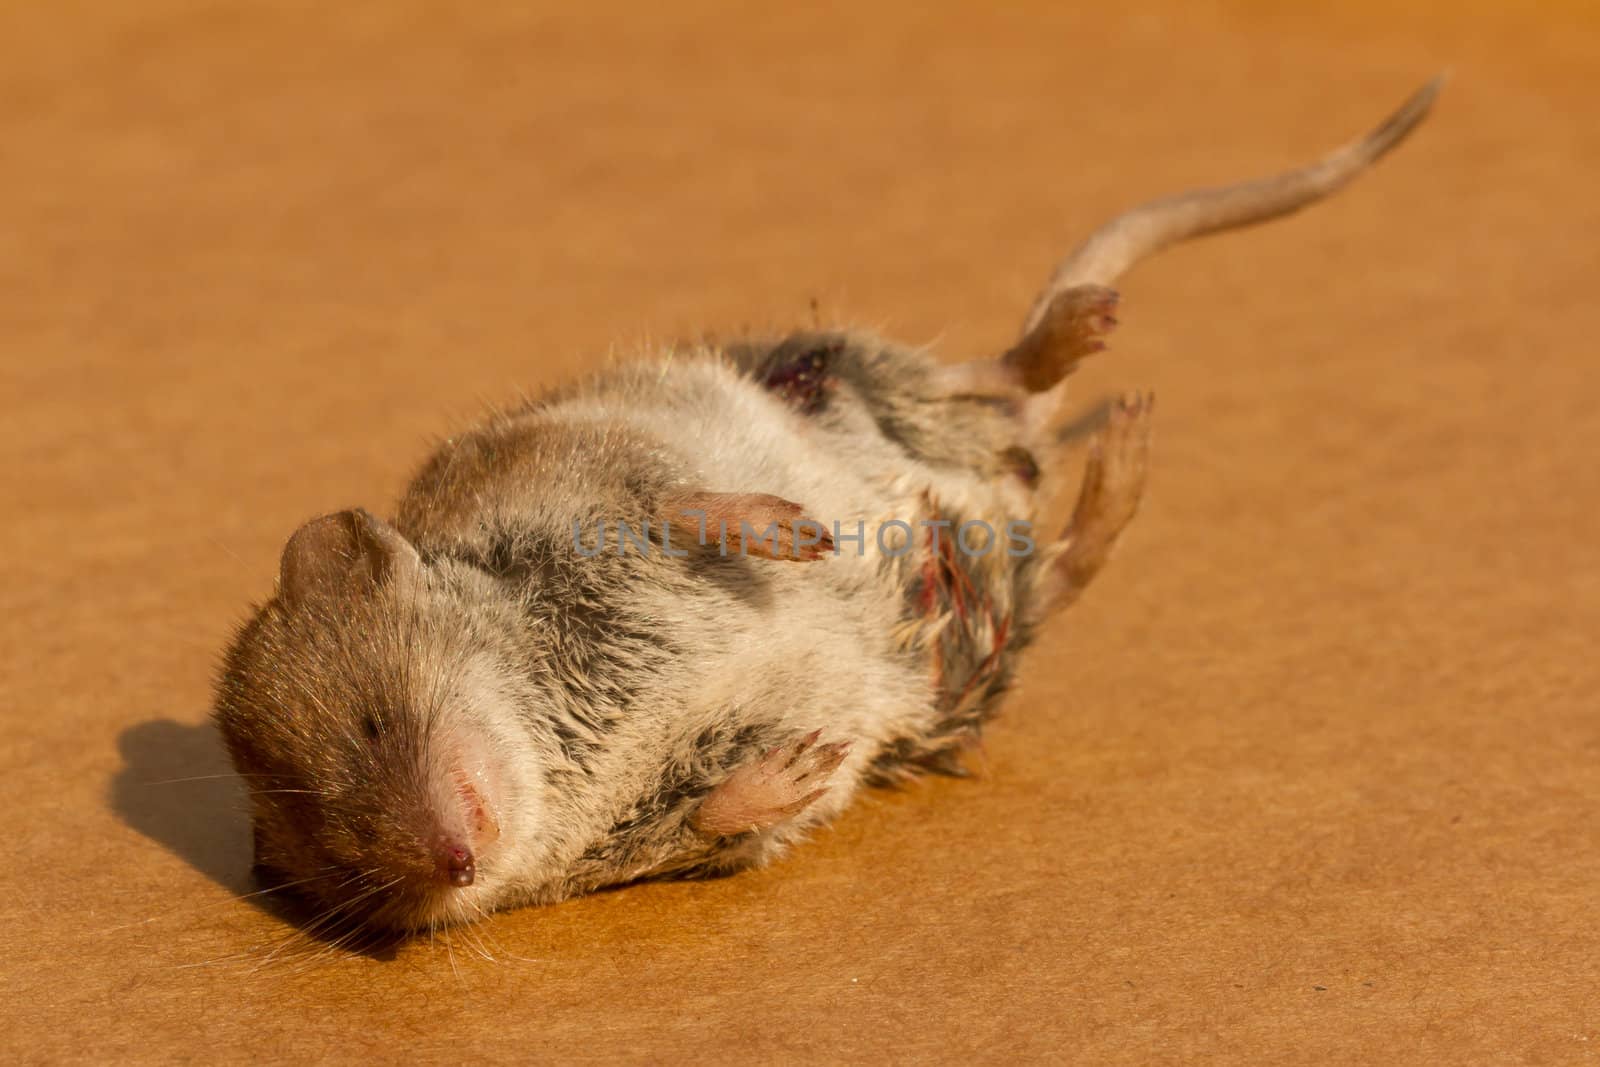 A dead mouse by michaklootwijk